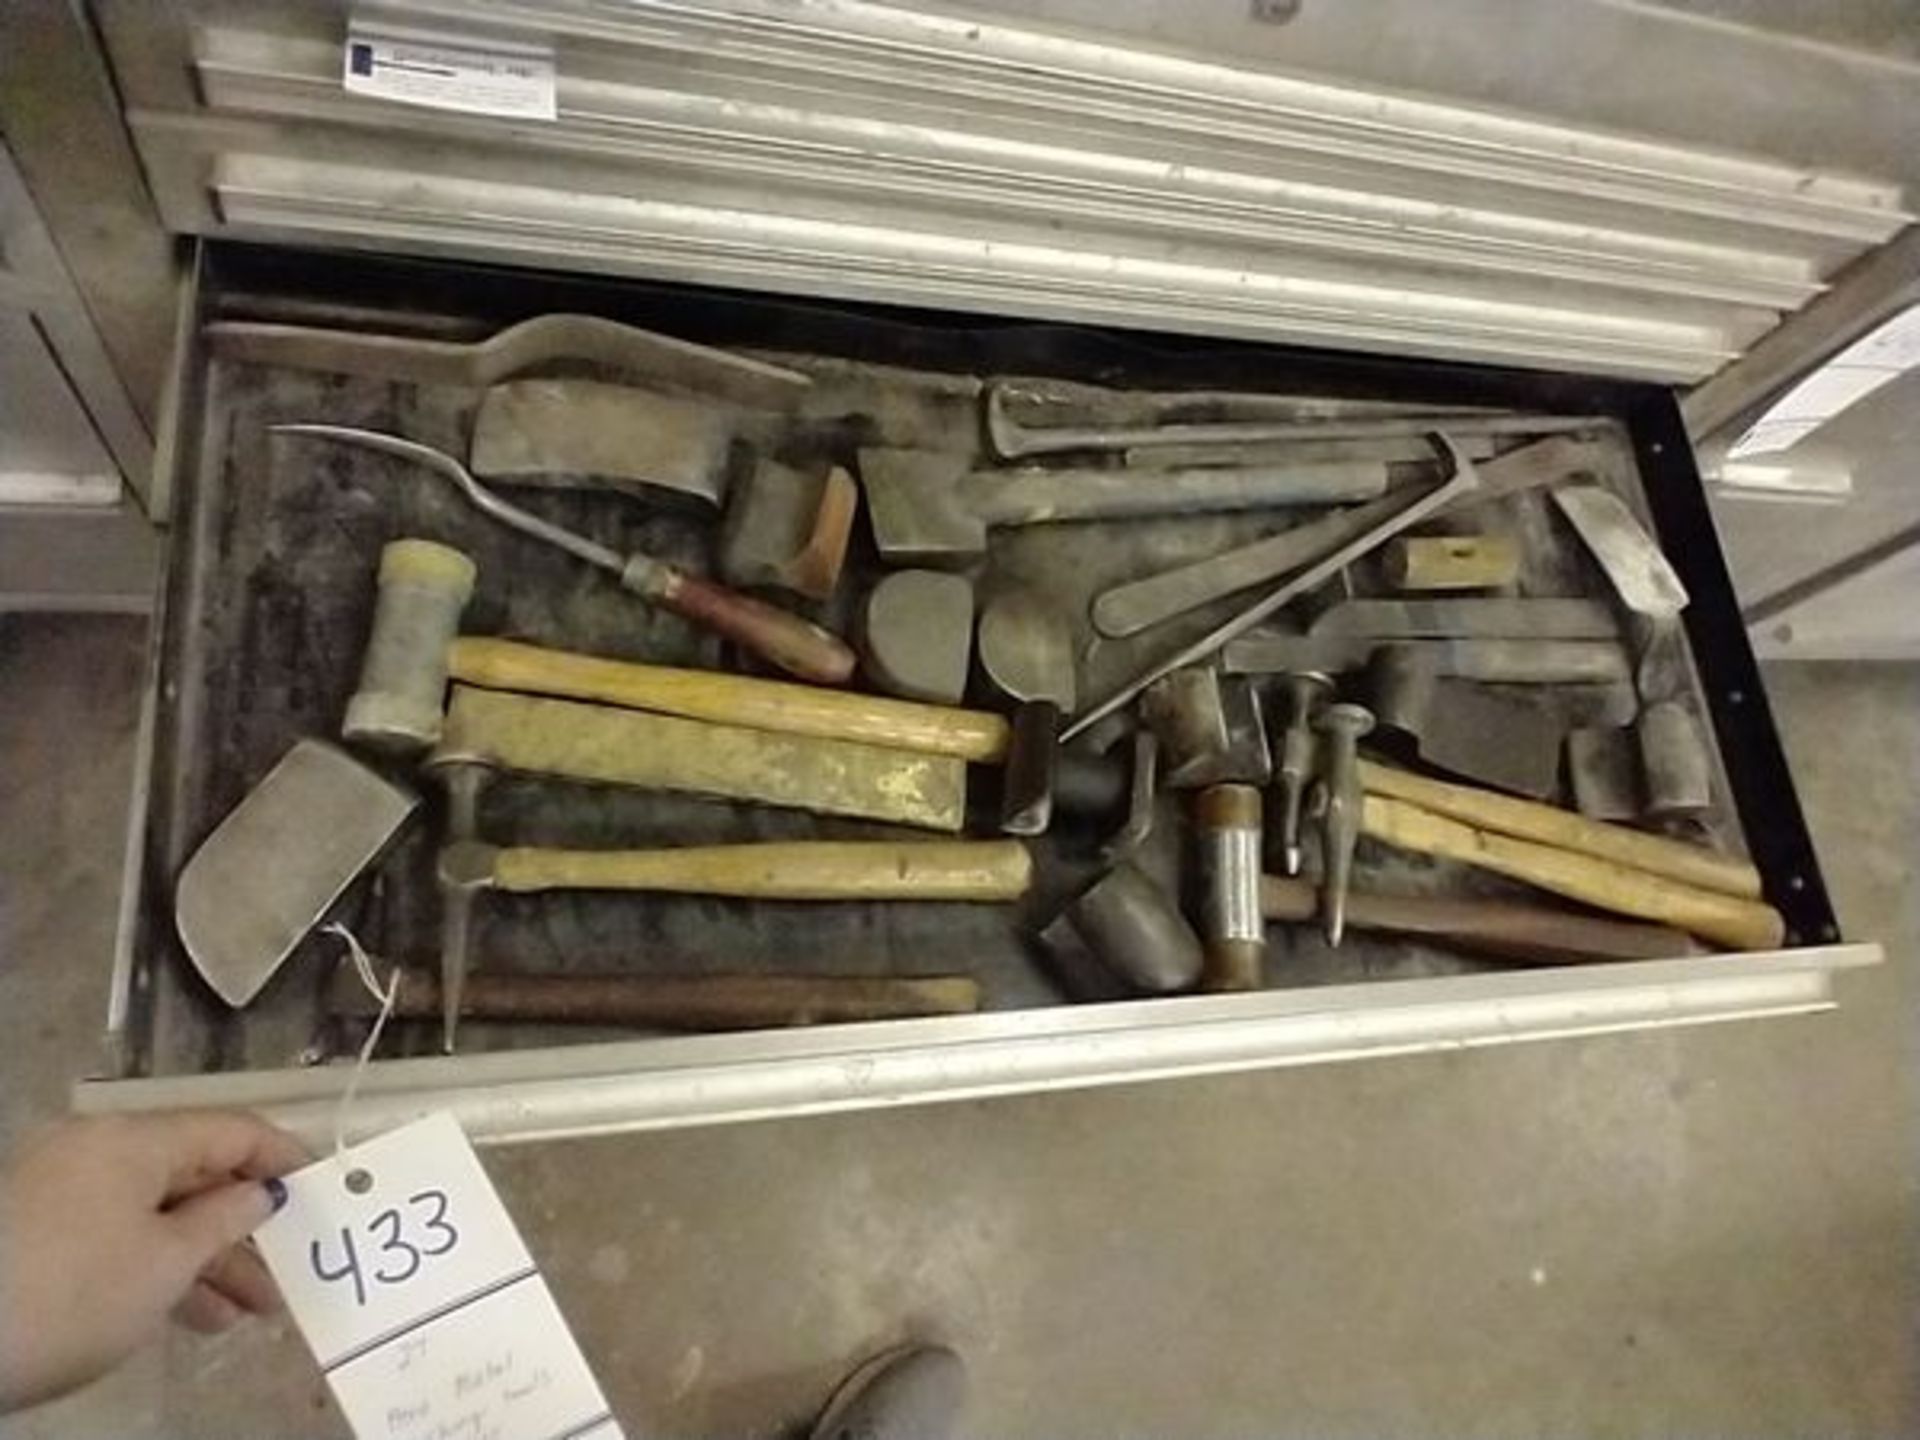 METAL WORKING TOOLS AND OTHER TOOLS